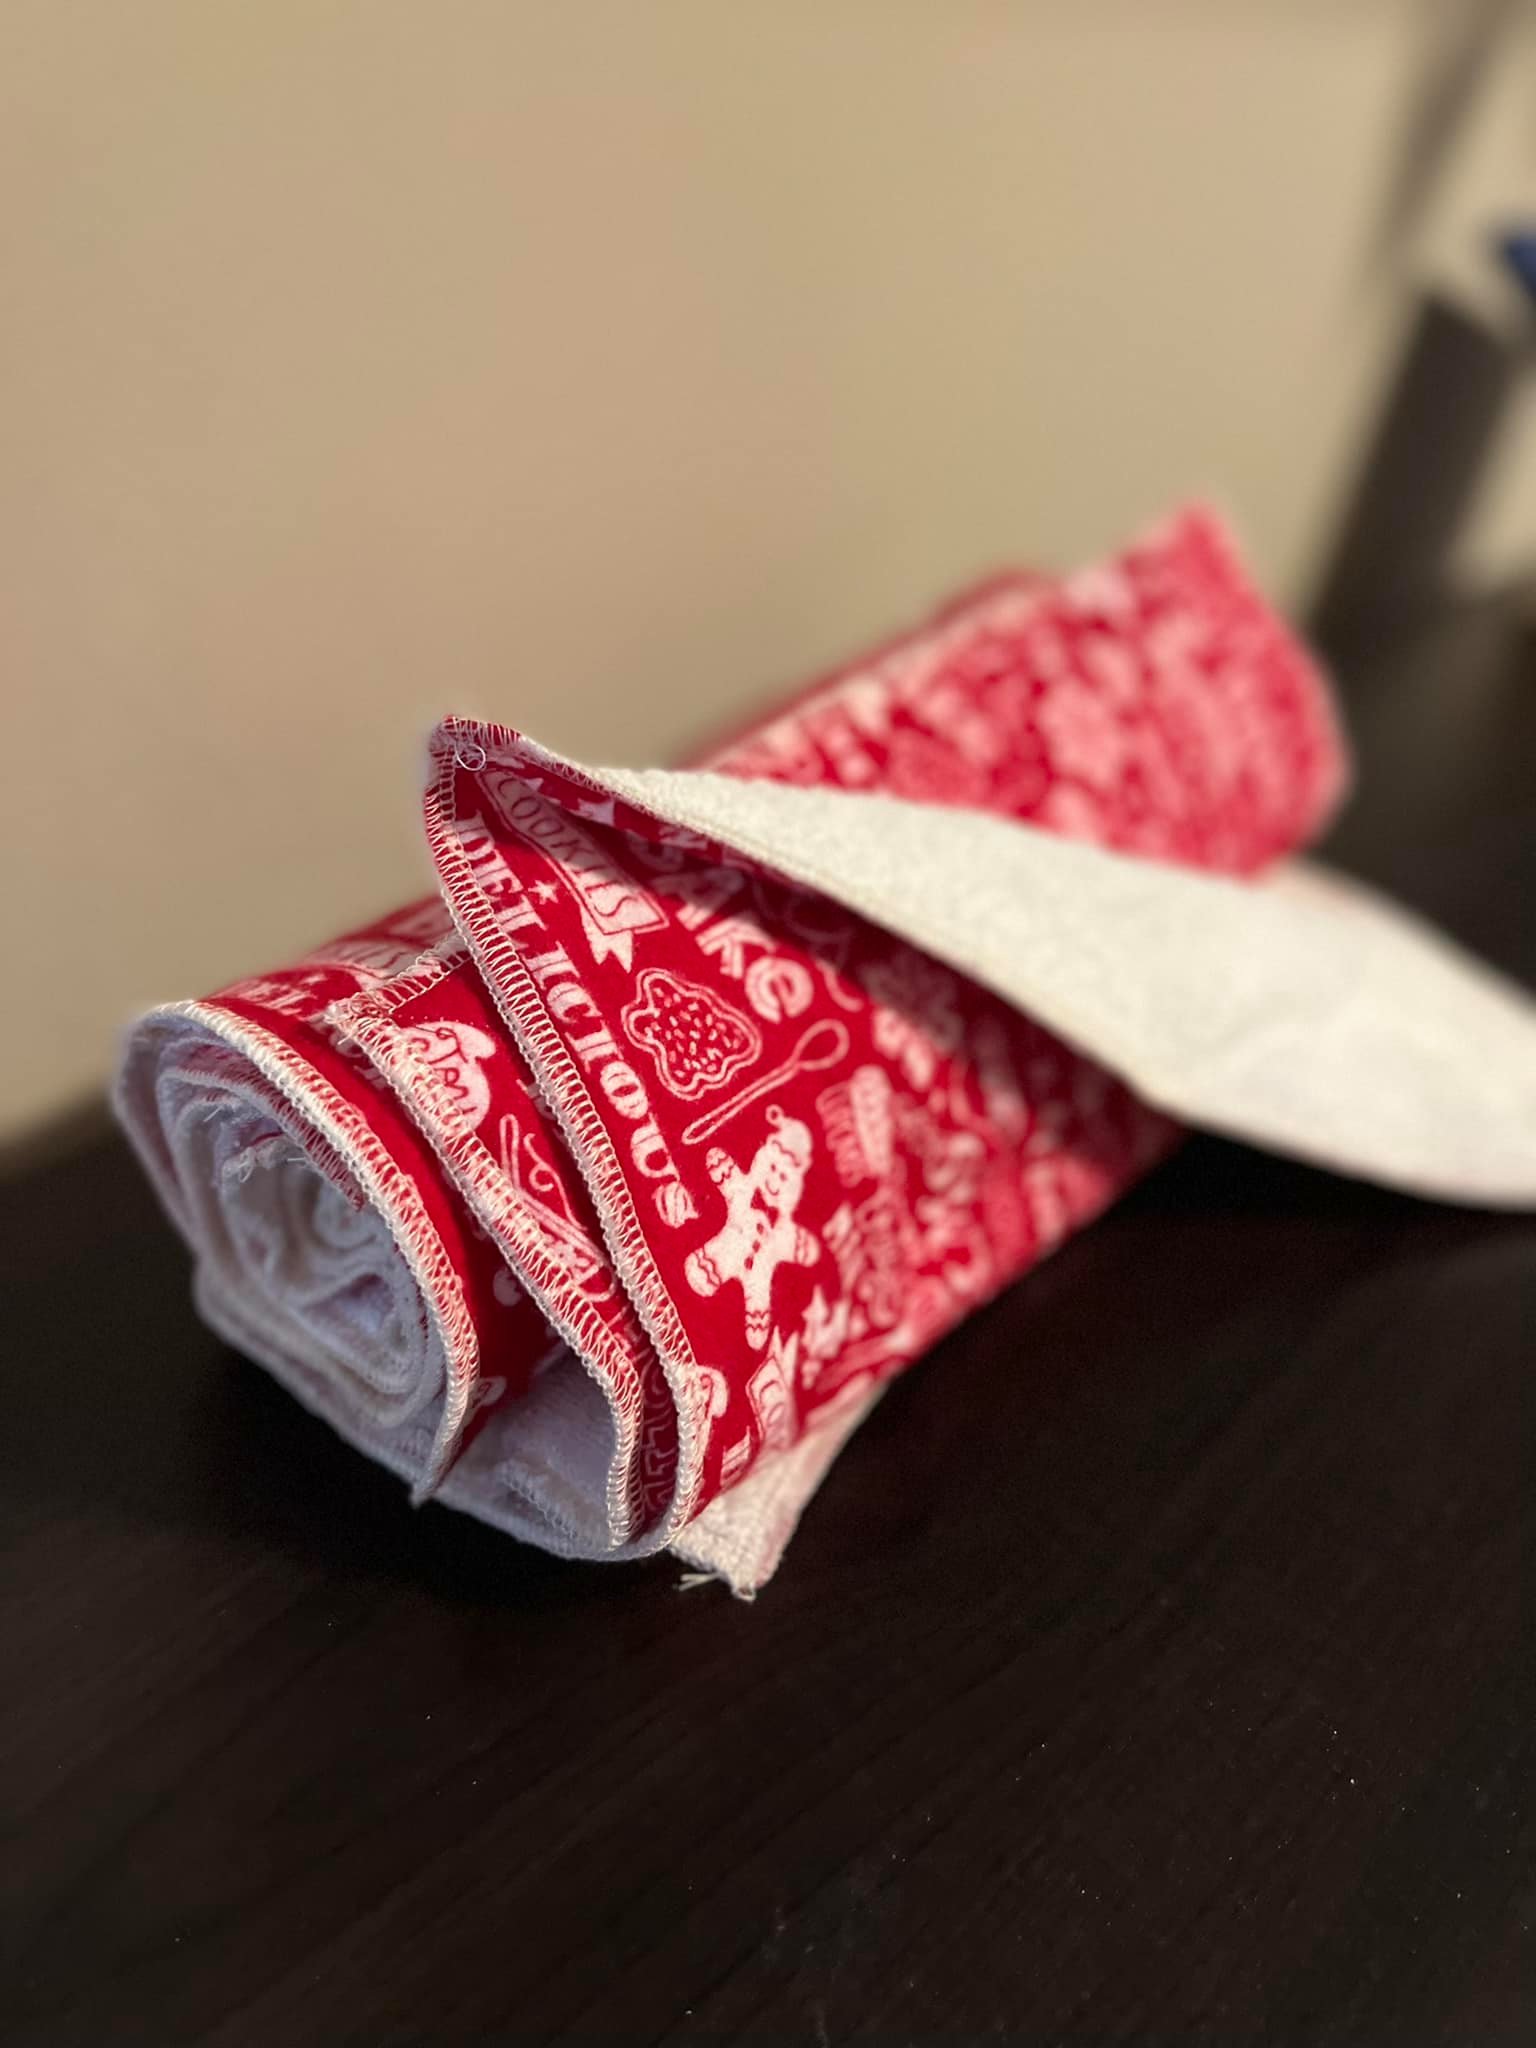 No-Sew Unpaper Towels and How to Store Them • The Crunchy Ginger